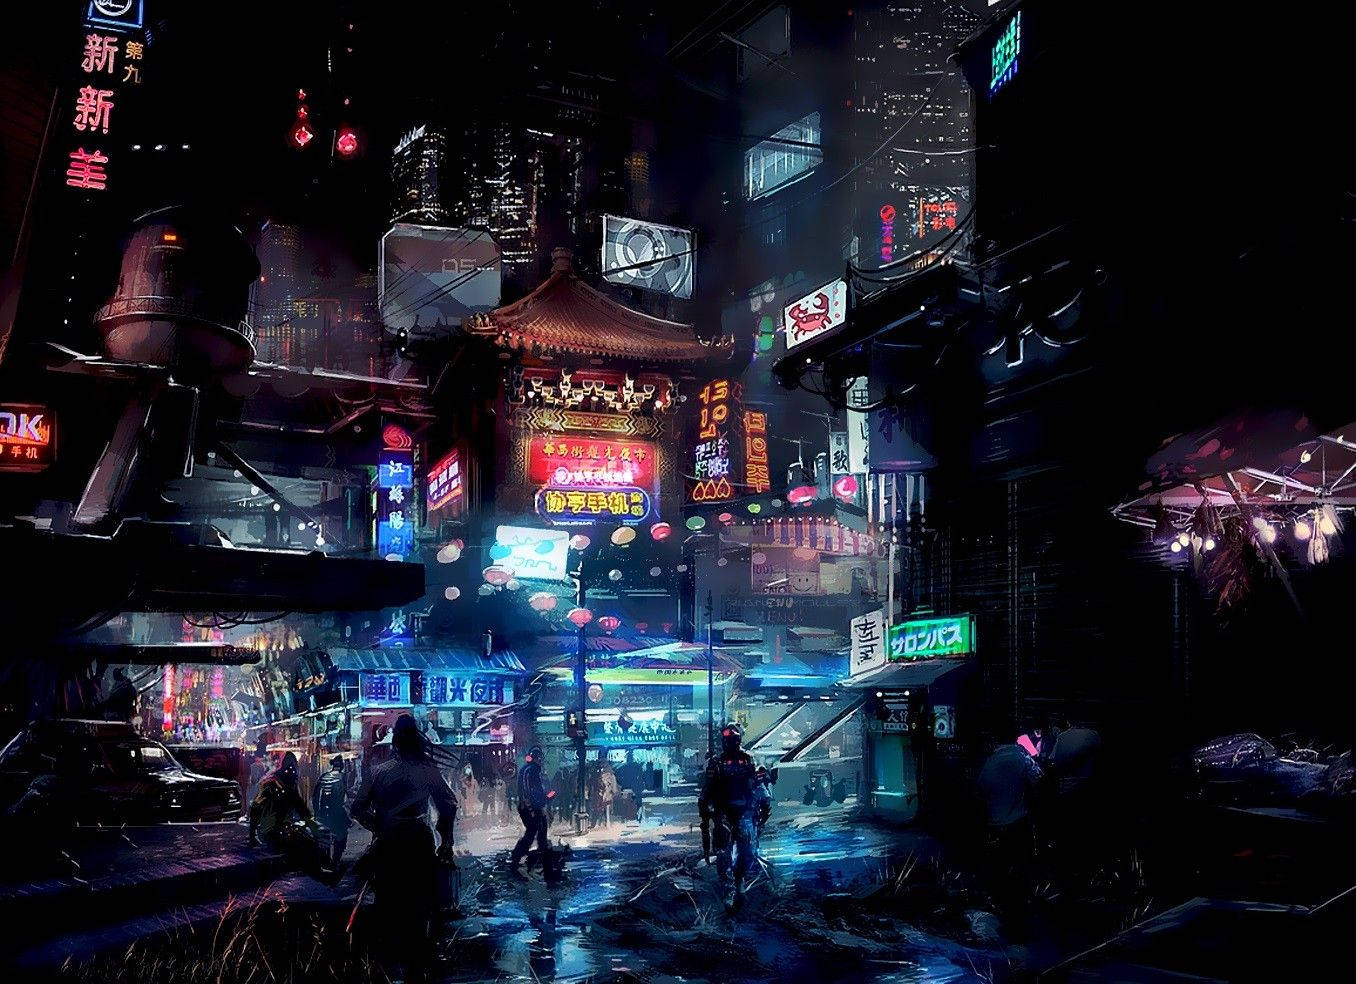 Cyberpunk 2077 wallpaper 2560x1440 Cyberpunk 2077, the most anticipated game of the year, is finally here. Download this wallpaper and get ready to explore the neon-lit streets of Night City. - Anime city